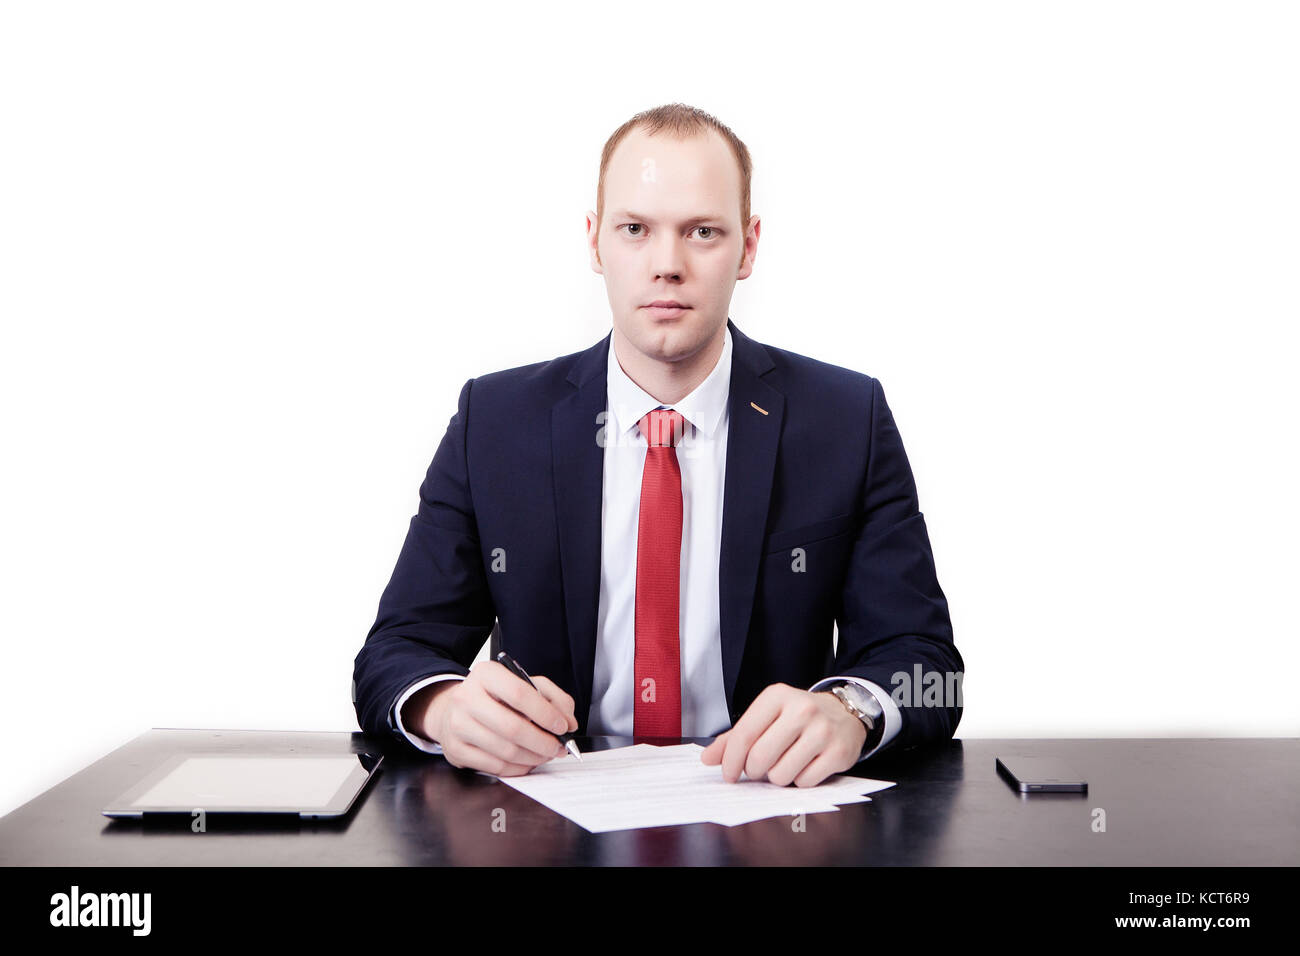 Portrait of confident young realtor in suit sitting at desk in office, signing contract, looking straight at desk, tablet, phone, on white background. Stock Photo